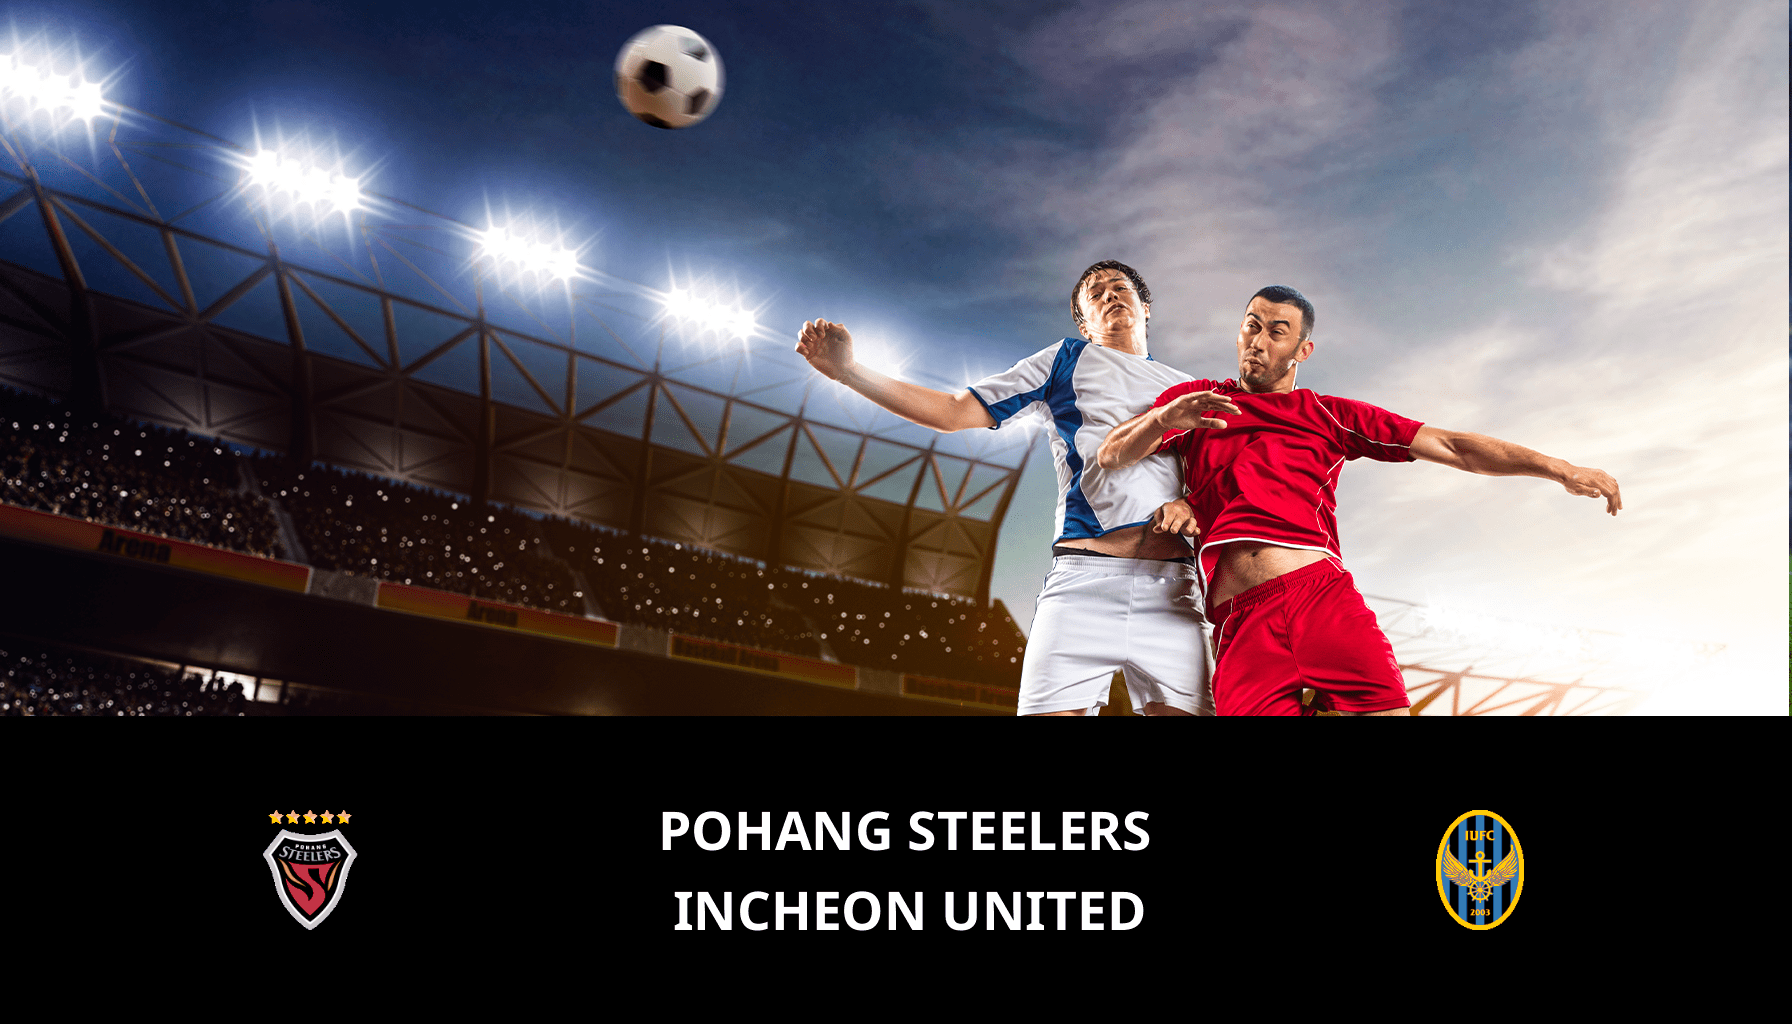 Previsione per Pohang Steelers VS Incheon United il 28/04/2024 Analysis of the match